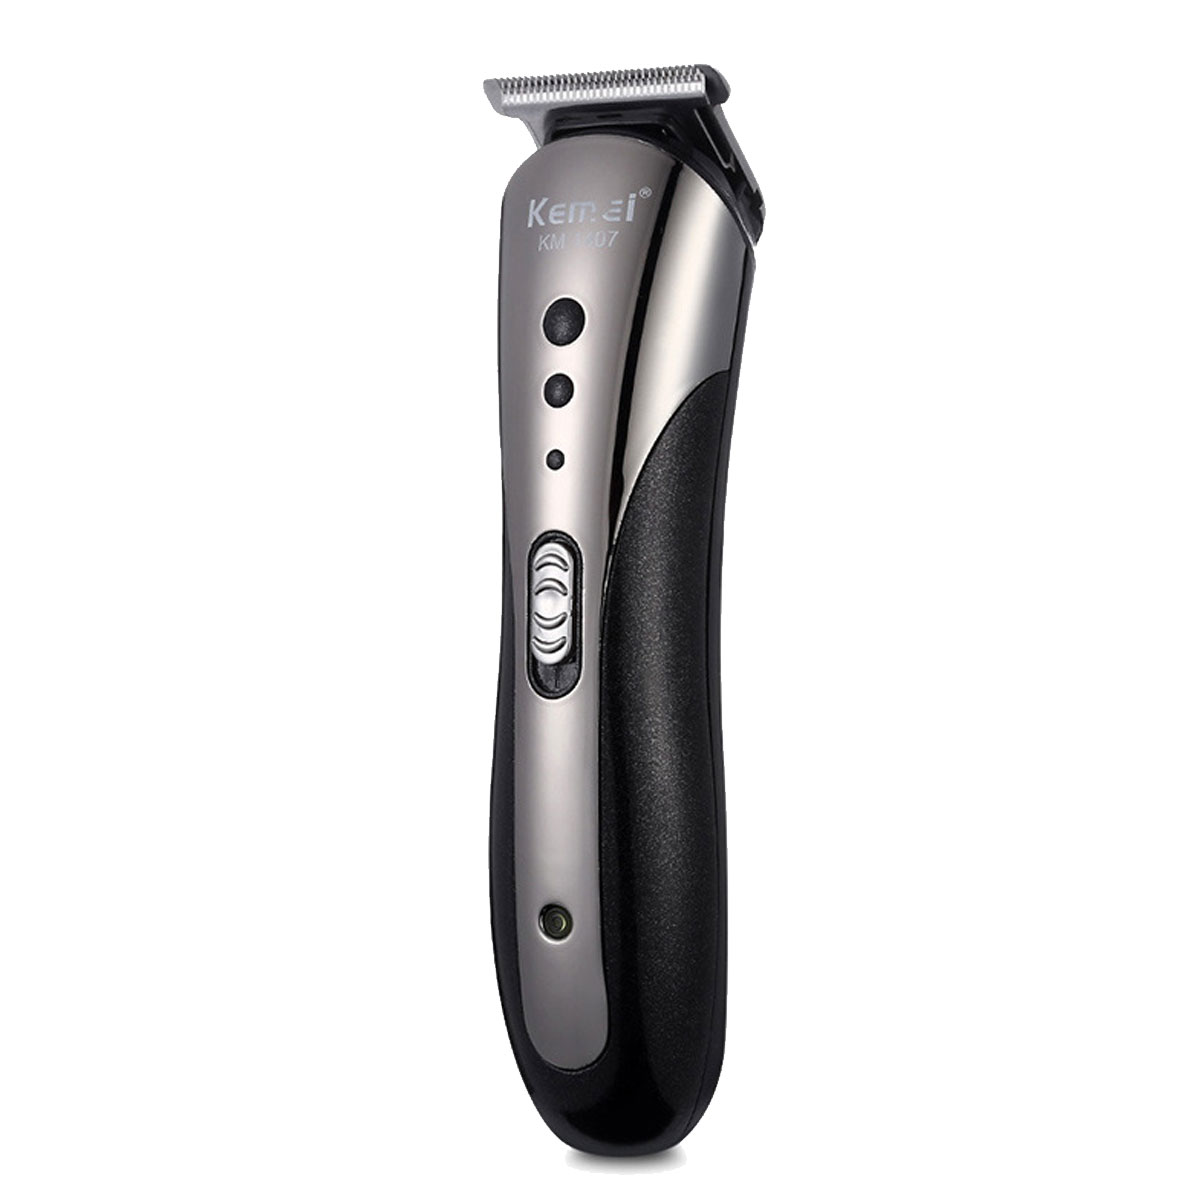 

KEMEI KM-1407 Electric Cordless Hair Clipper Nose Trimmer Beard Body Shaver Grooming Razor Kit for Salon Hair Styling to